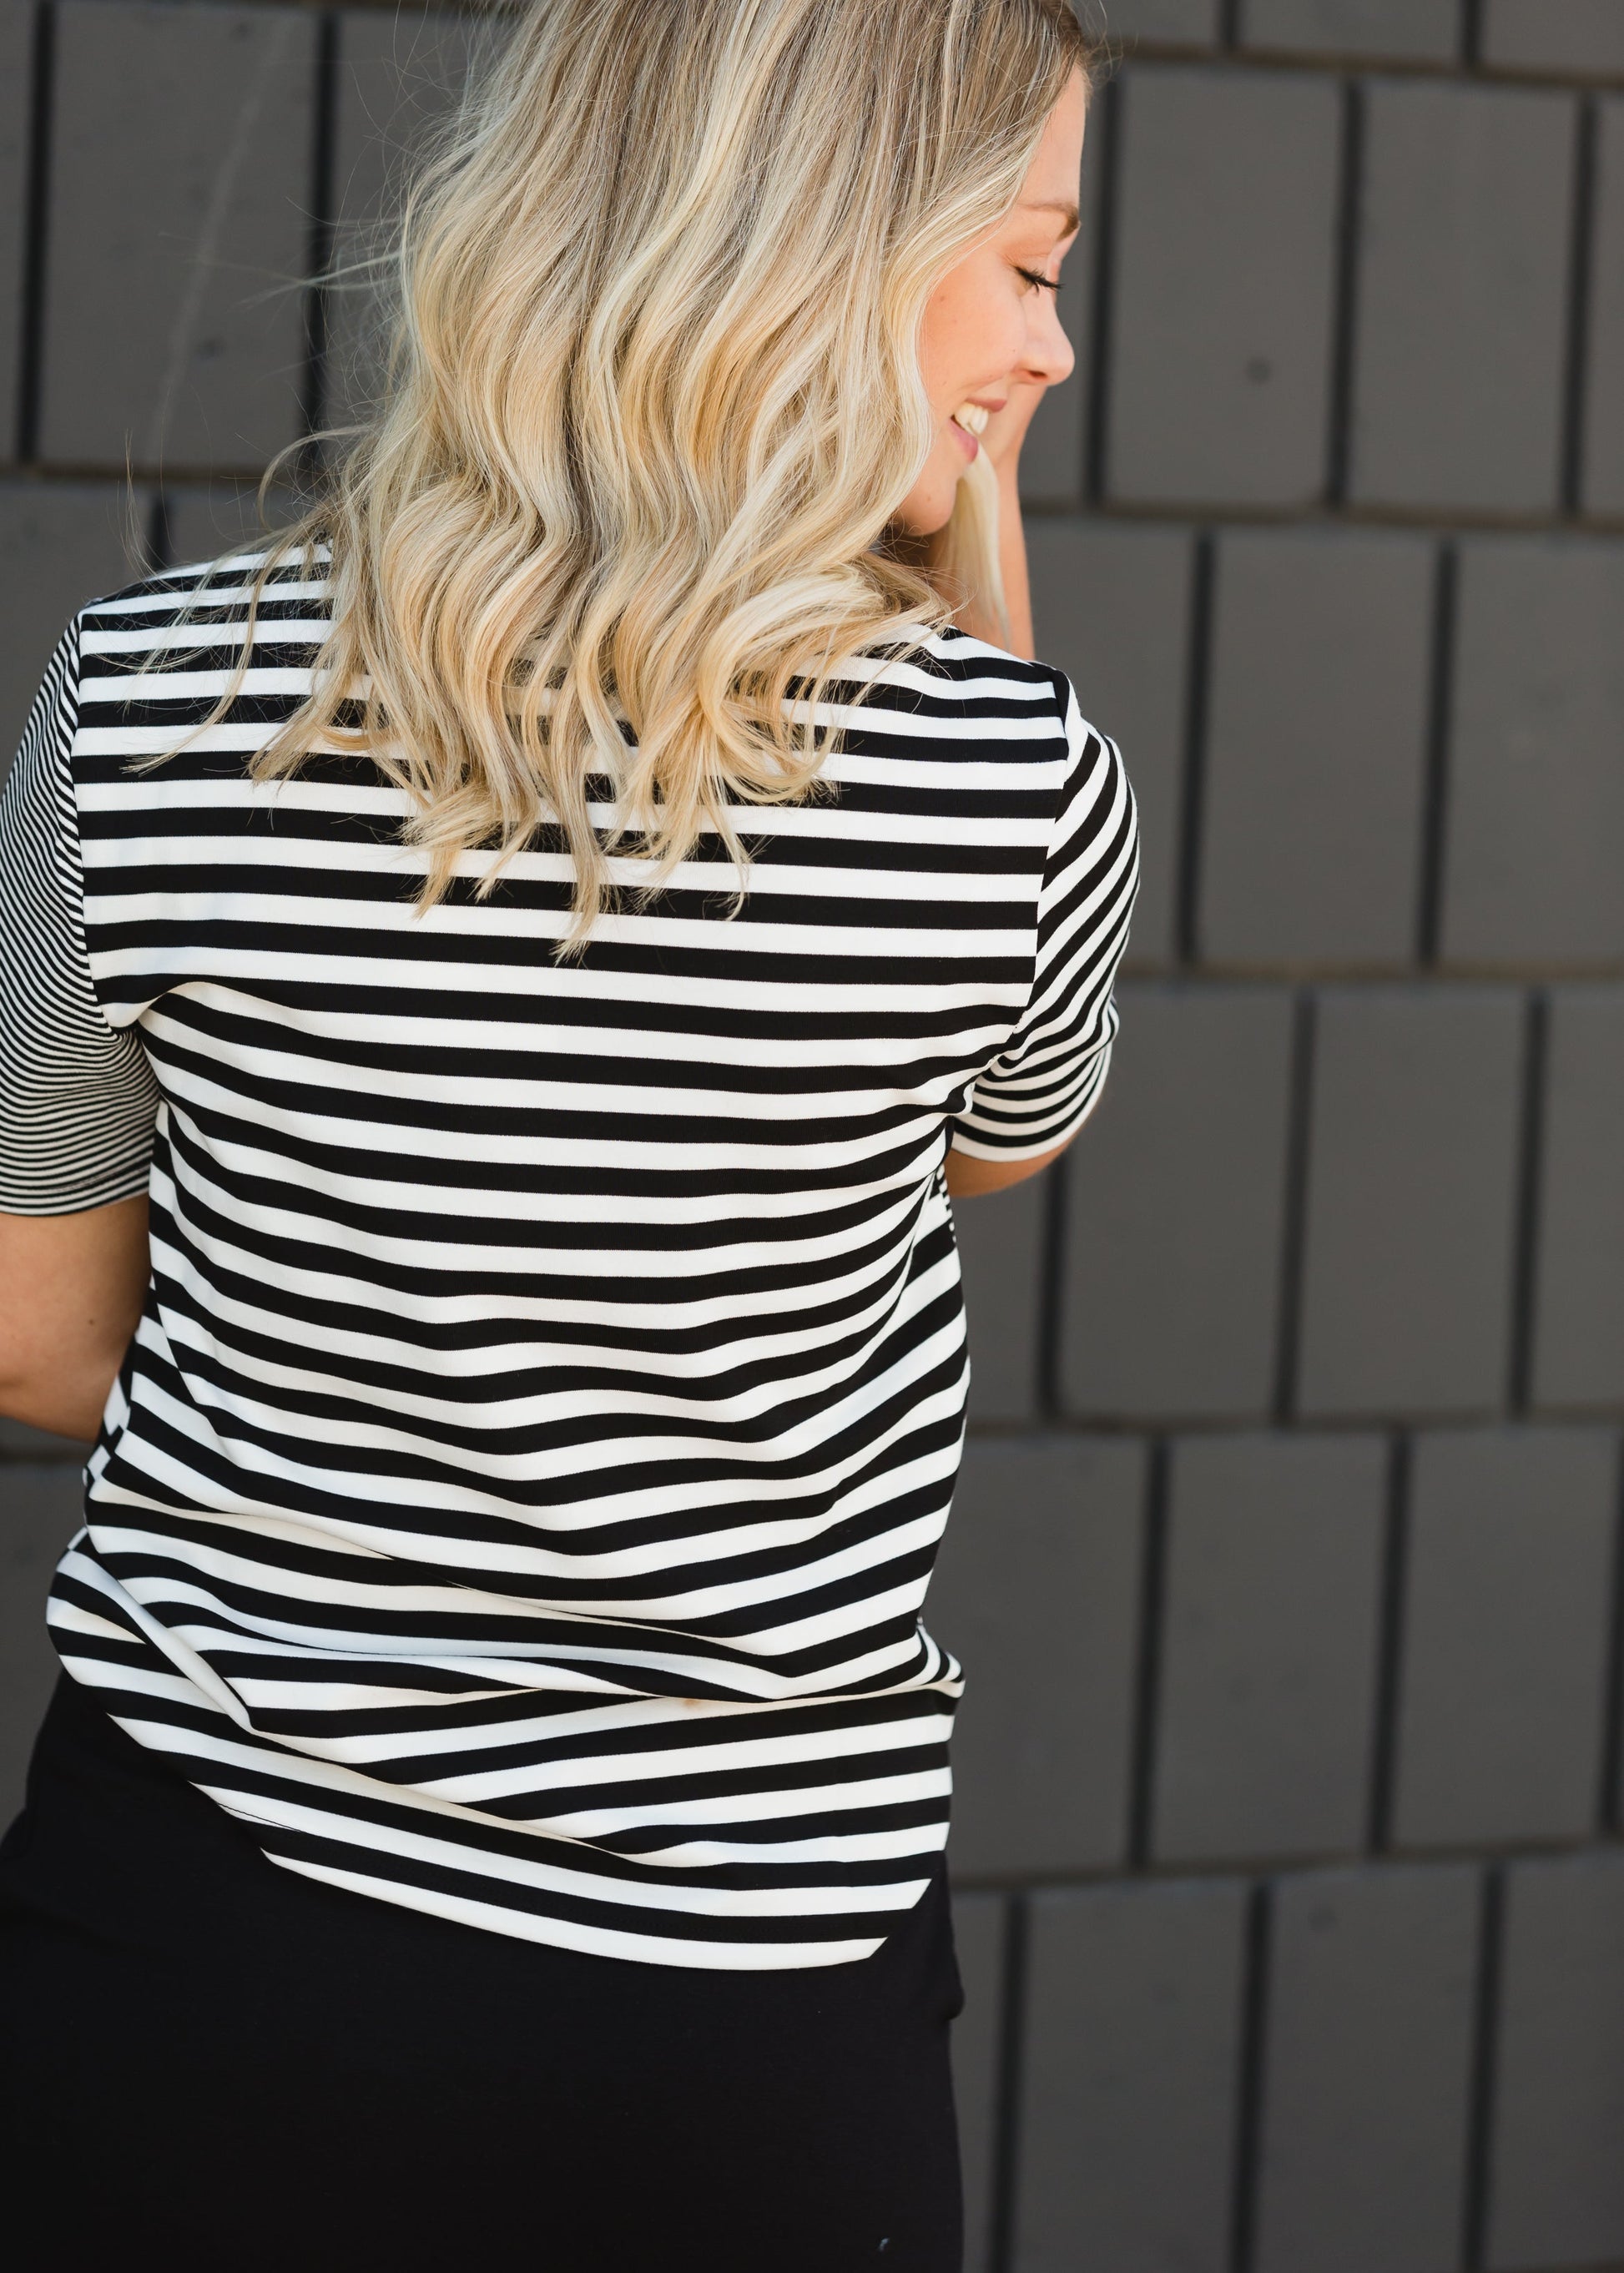 Black and White Mixed Striped Tee Shirt - FINAL SALE Tops